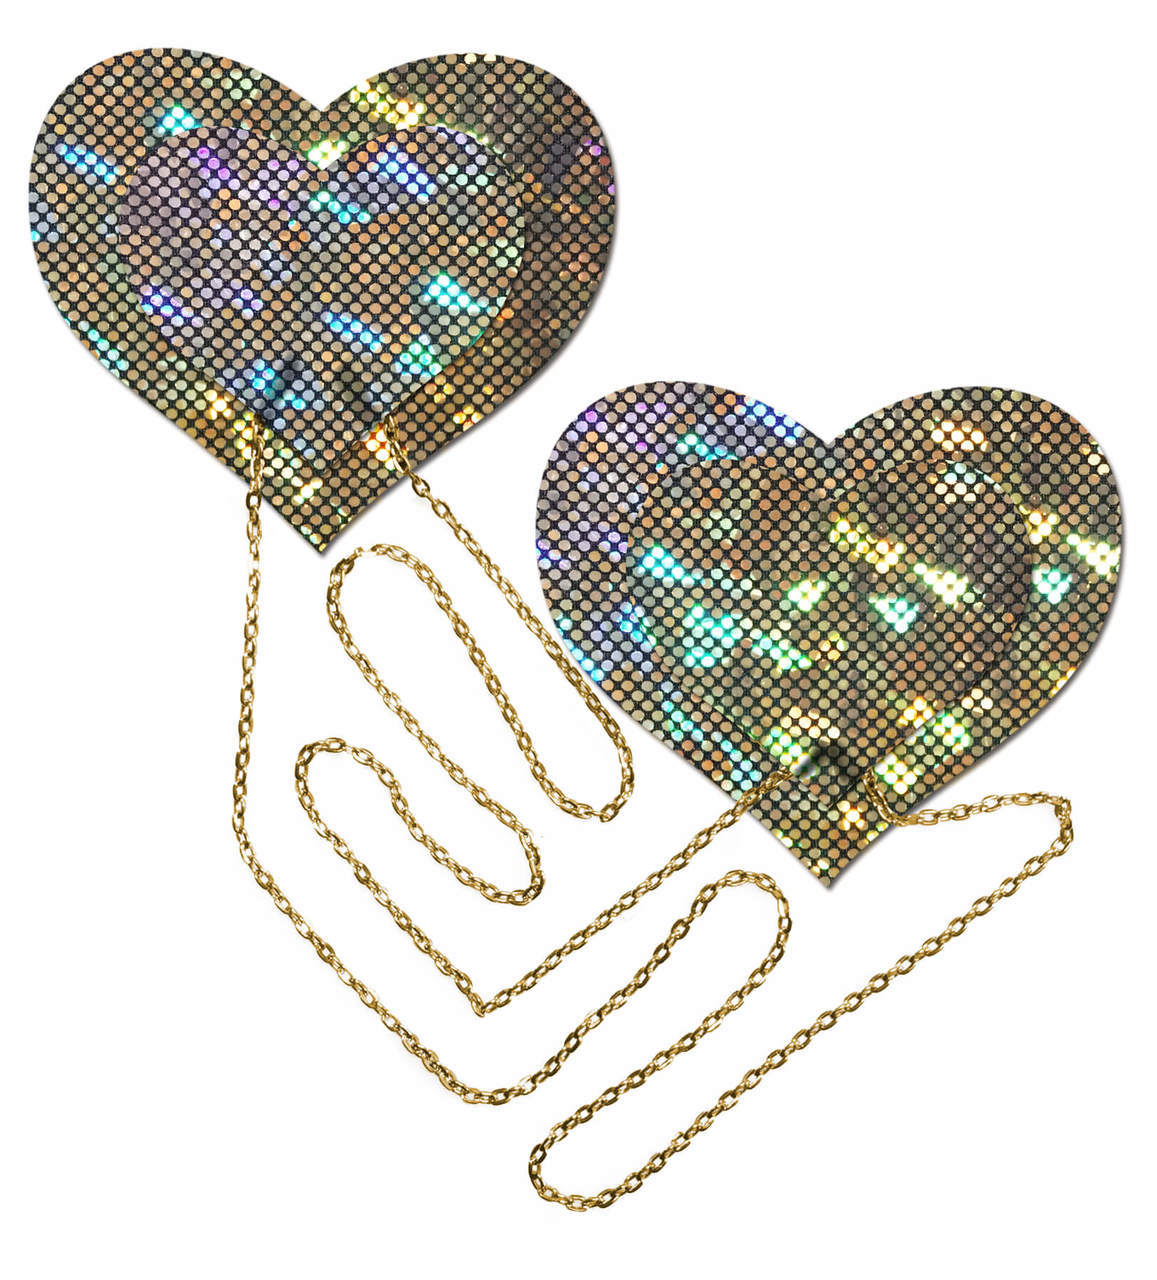 GOLD SHATTERED DISCO BALL HEART W/ GOLD CHAINS PASTIES - Click Image to Close